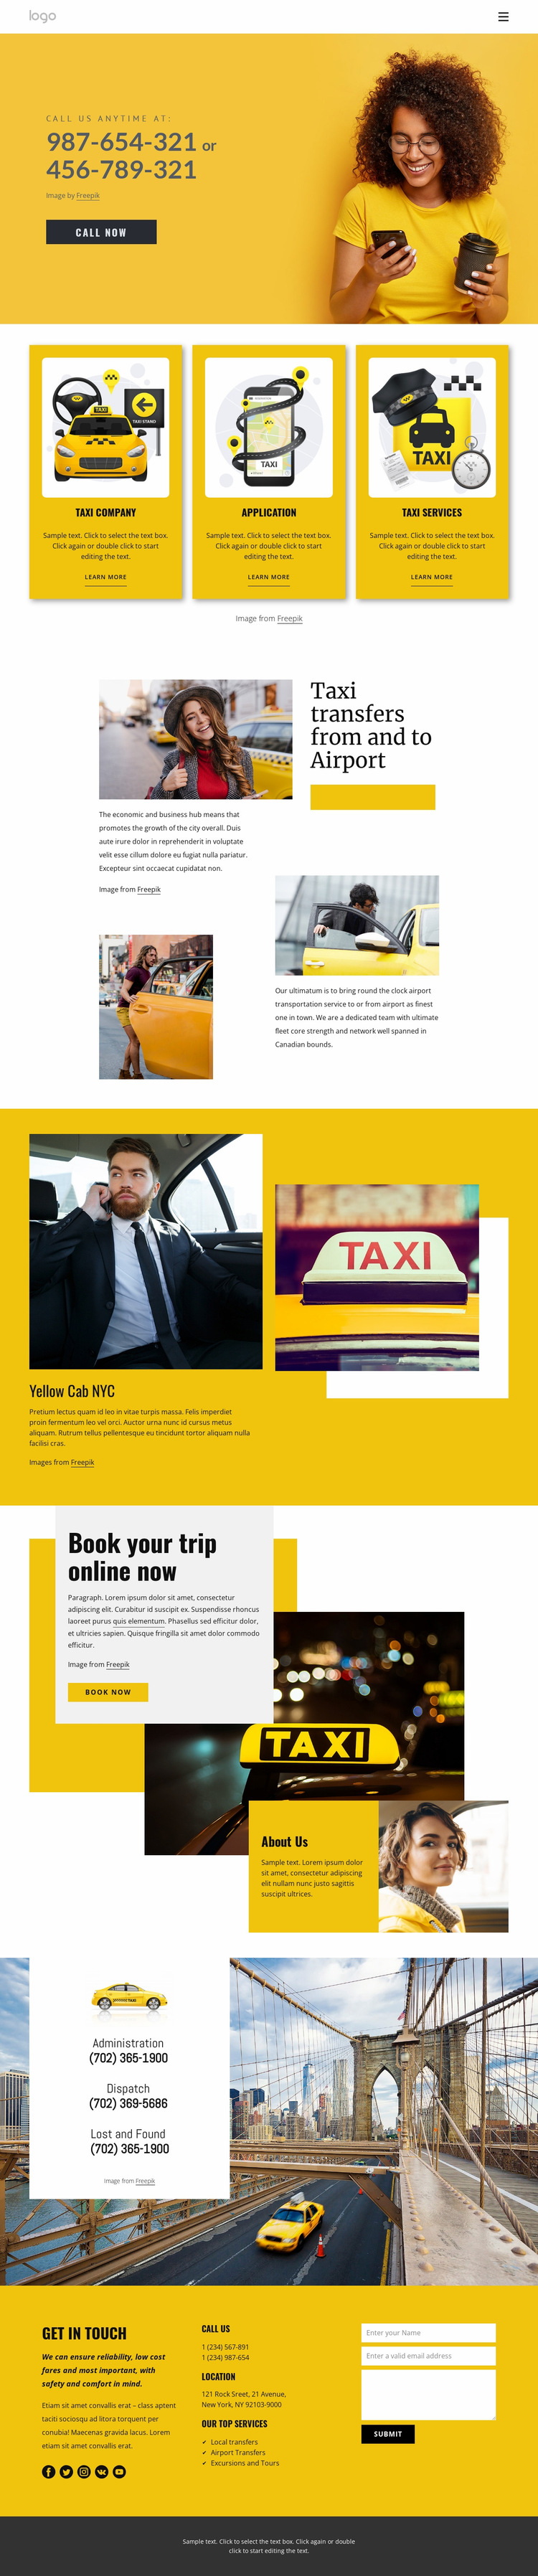 Quality taxi service Website Builder Templates